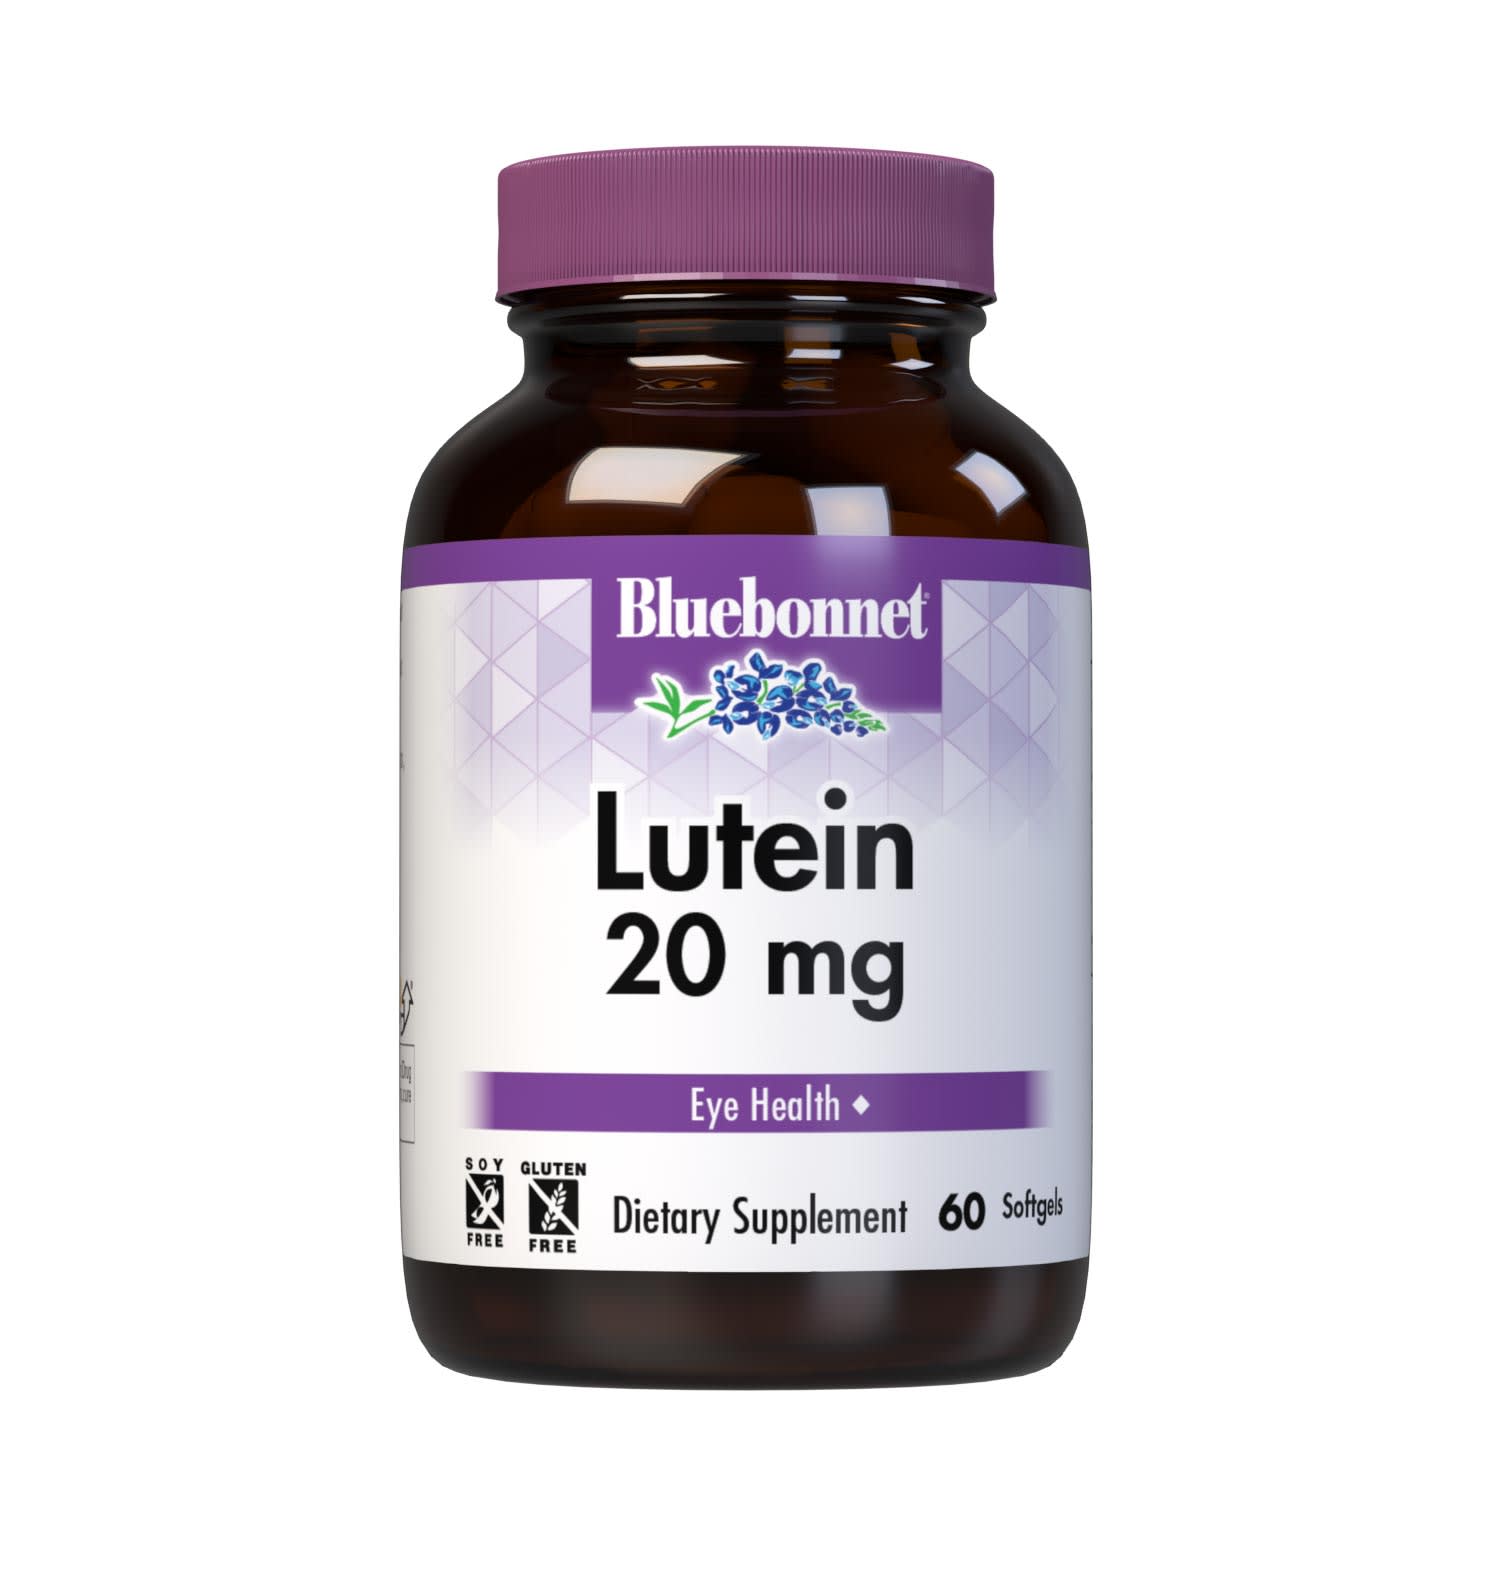 Bluebonnet’s Lutein 20 mg 60 Softgels are formulated with lutein and zeaxanthin from marigold flower extract. Lutein and zeaxanthin are carotenoids found in fruits and vegetables that support optimal eye health. Description panel. #size_60 count